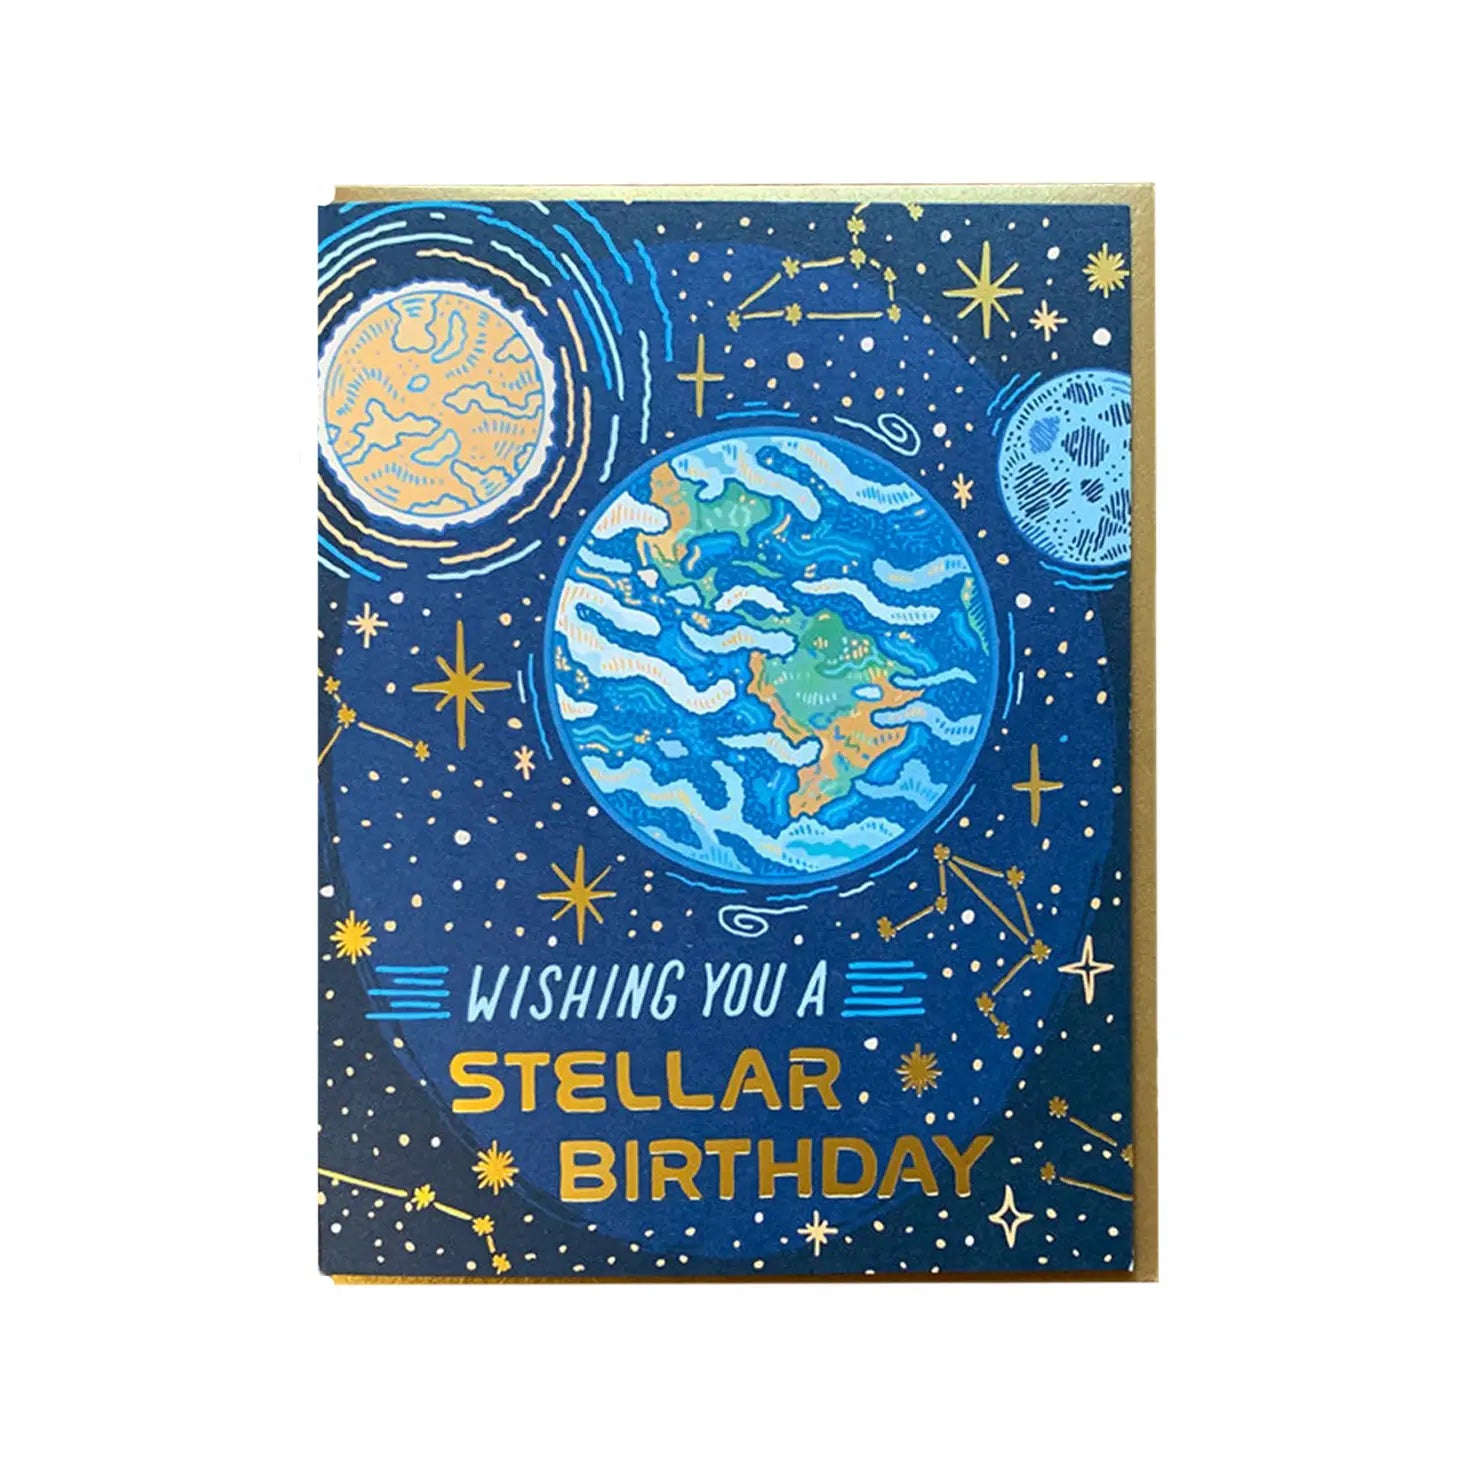 White card with dark blue starry night background. Blue and orange planets. Blue text reads "wishing you a" and gold text reads "stellar birthday"